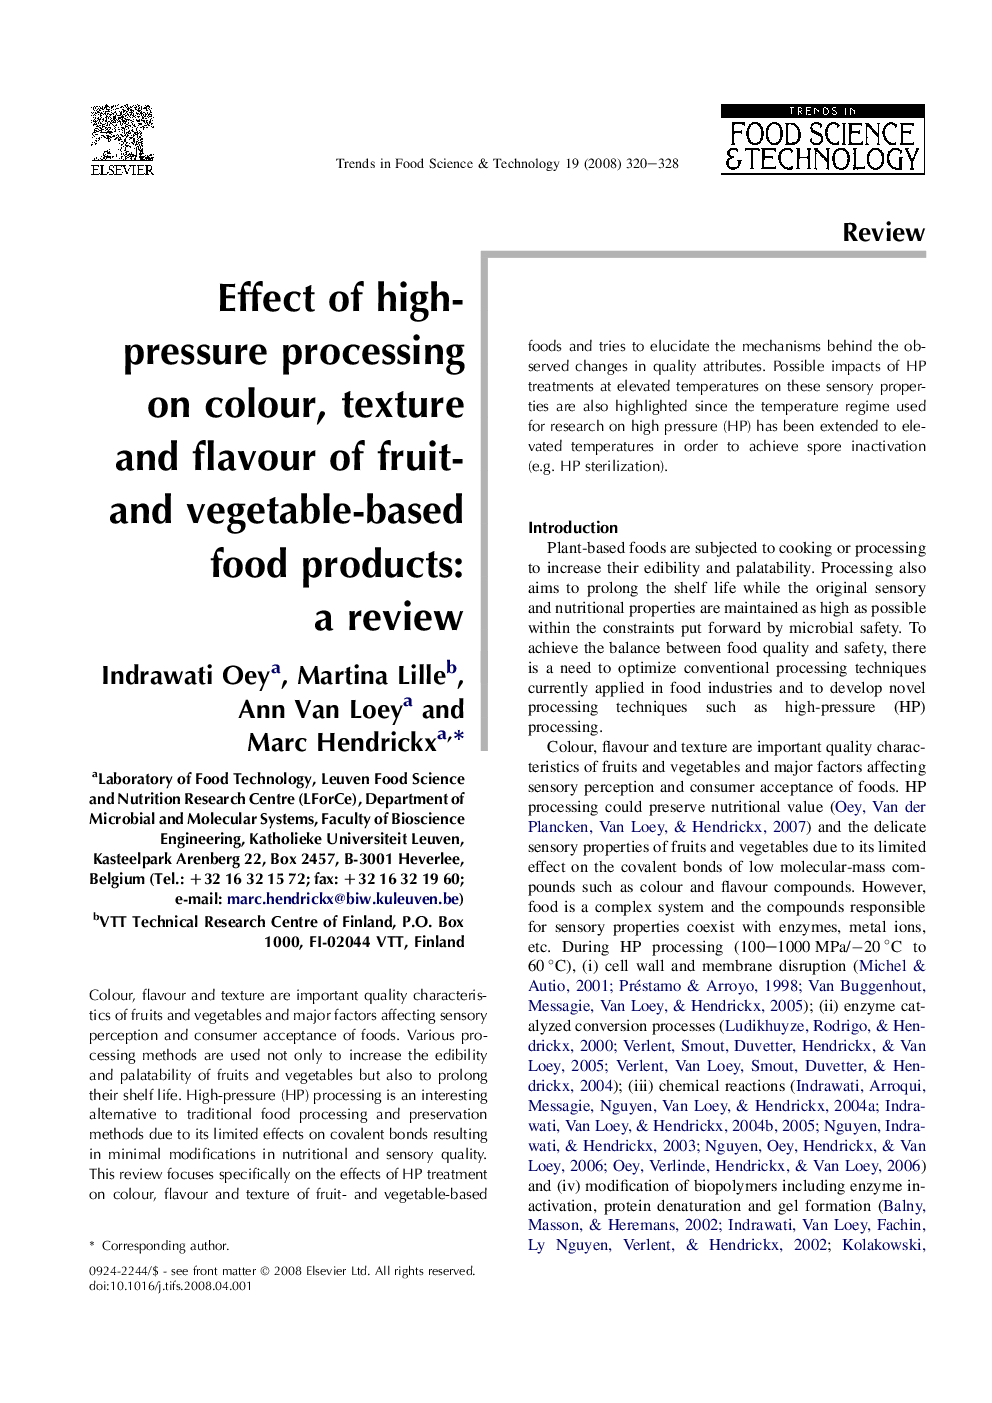 Effect of high-pressure processing on colour, texture and flavour of fruit- and vegetable-based food products: a review